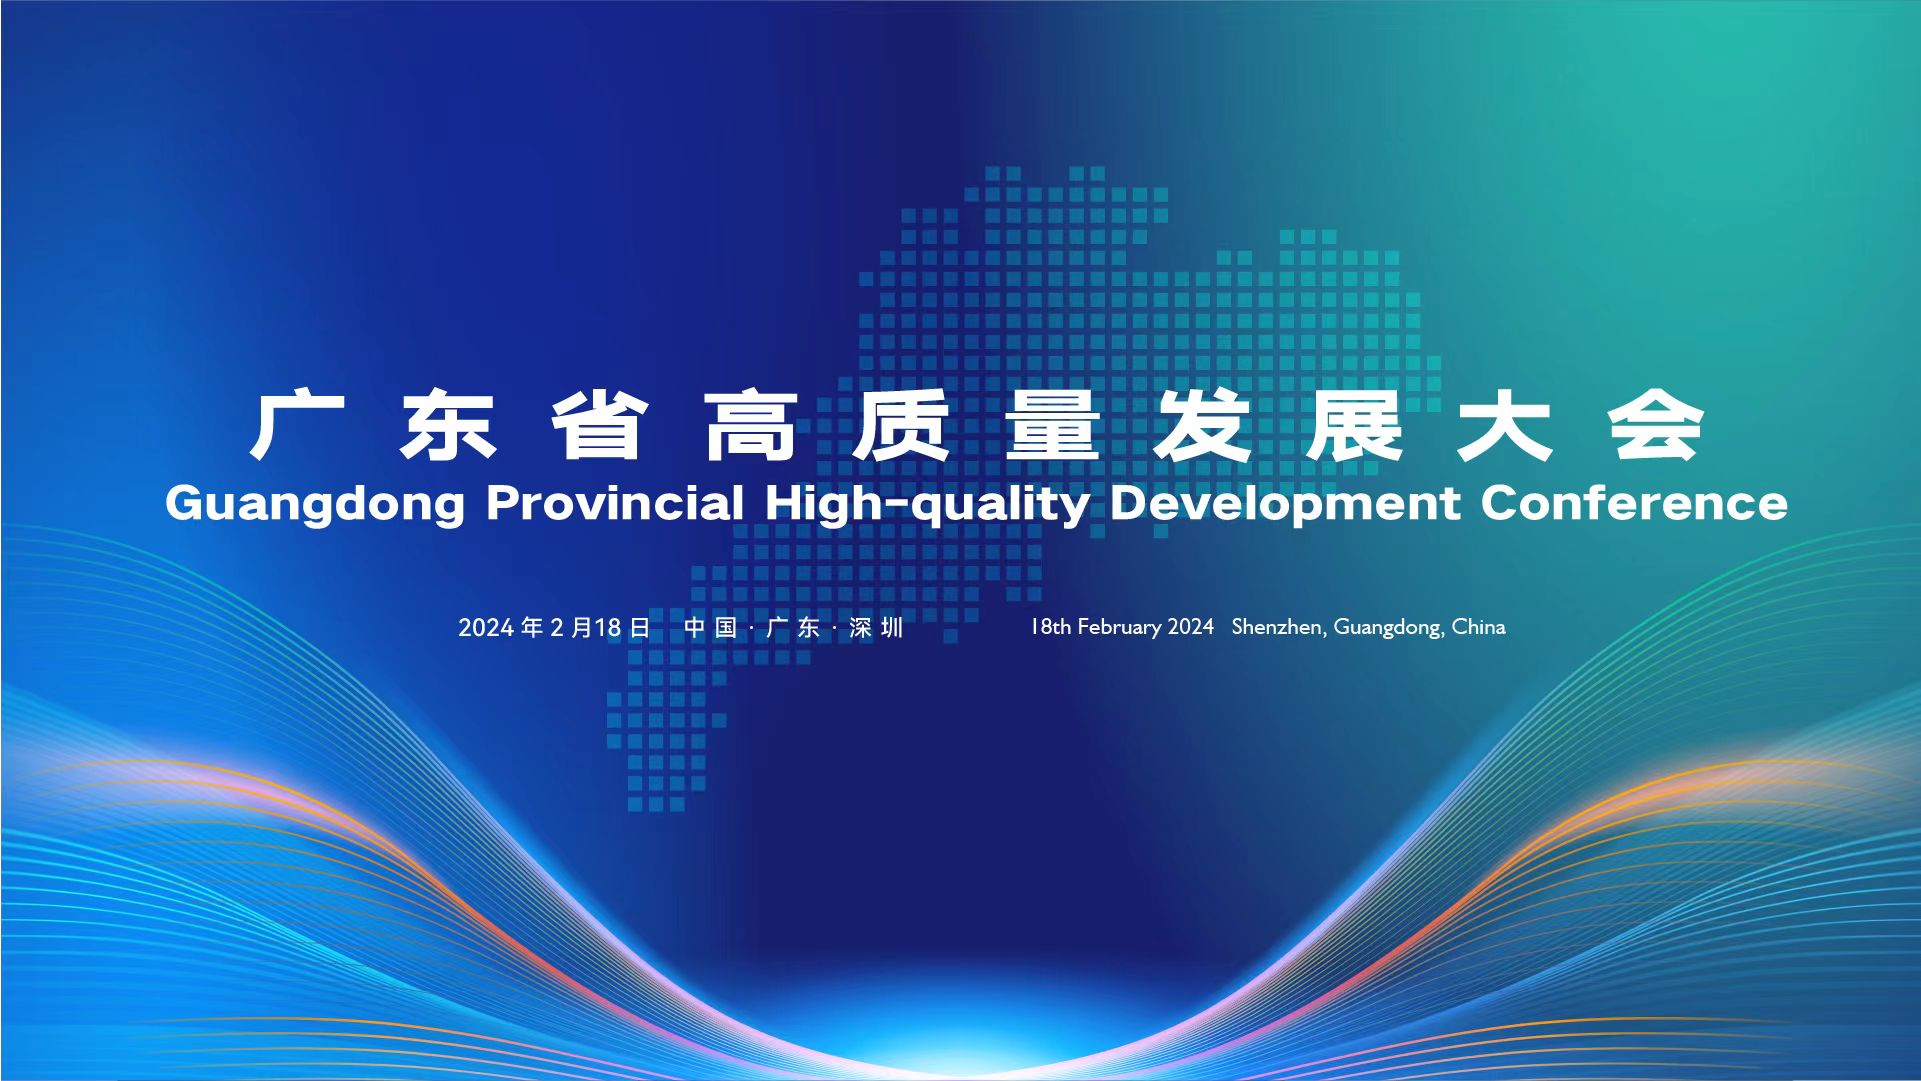 Guangdong to hold provincial high-quality development conference